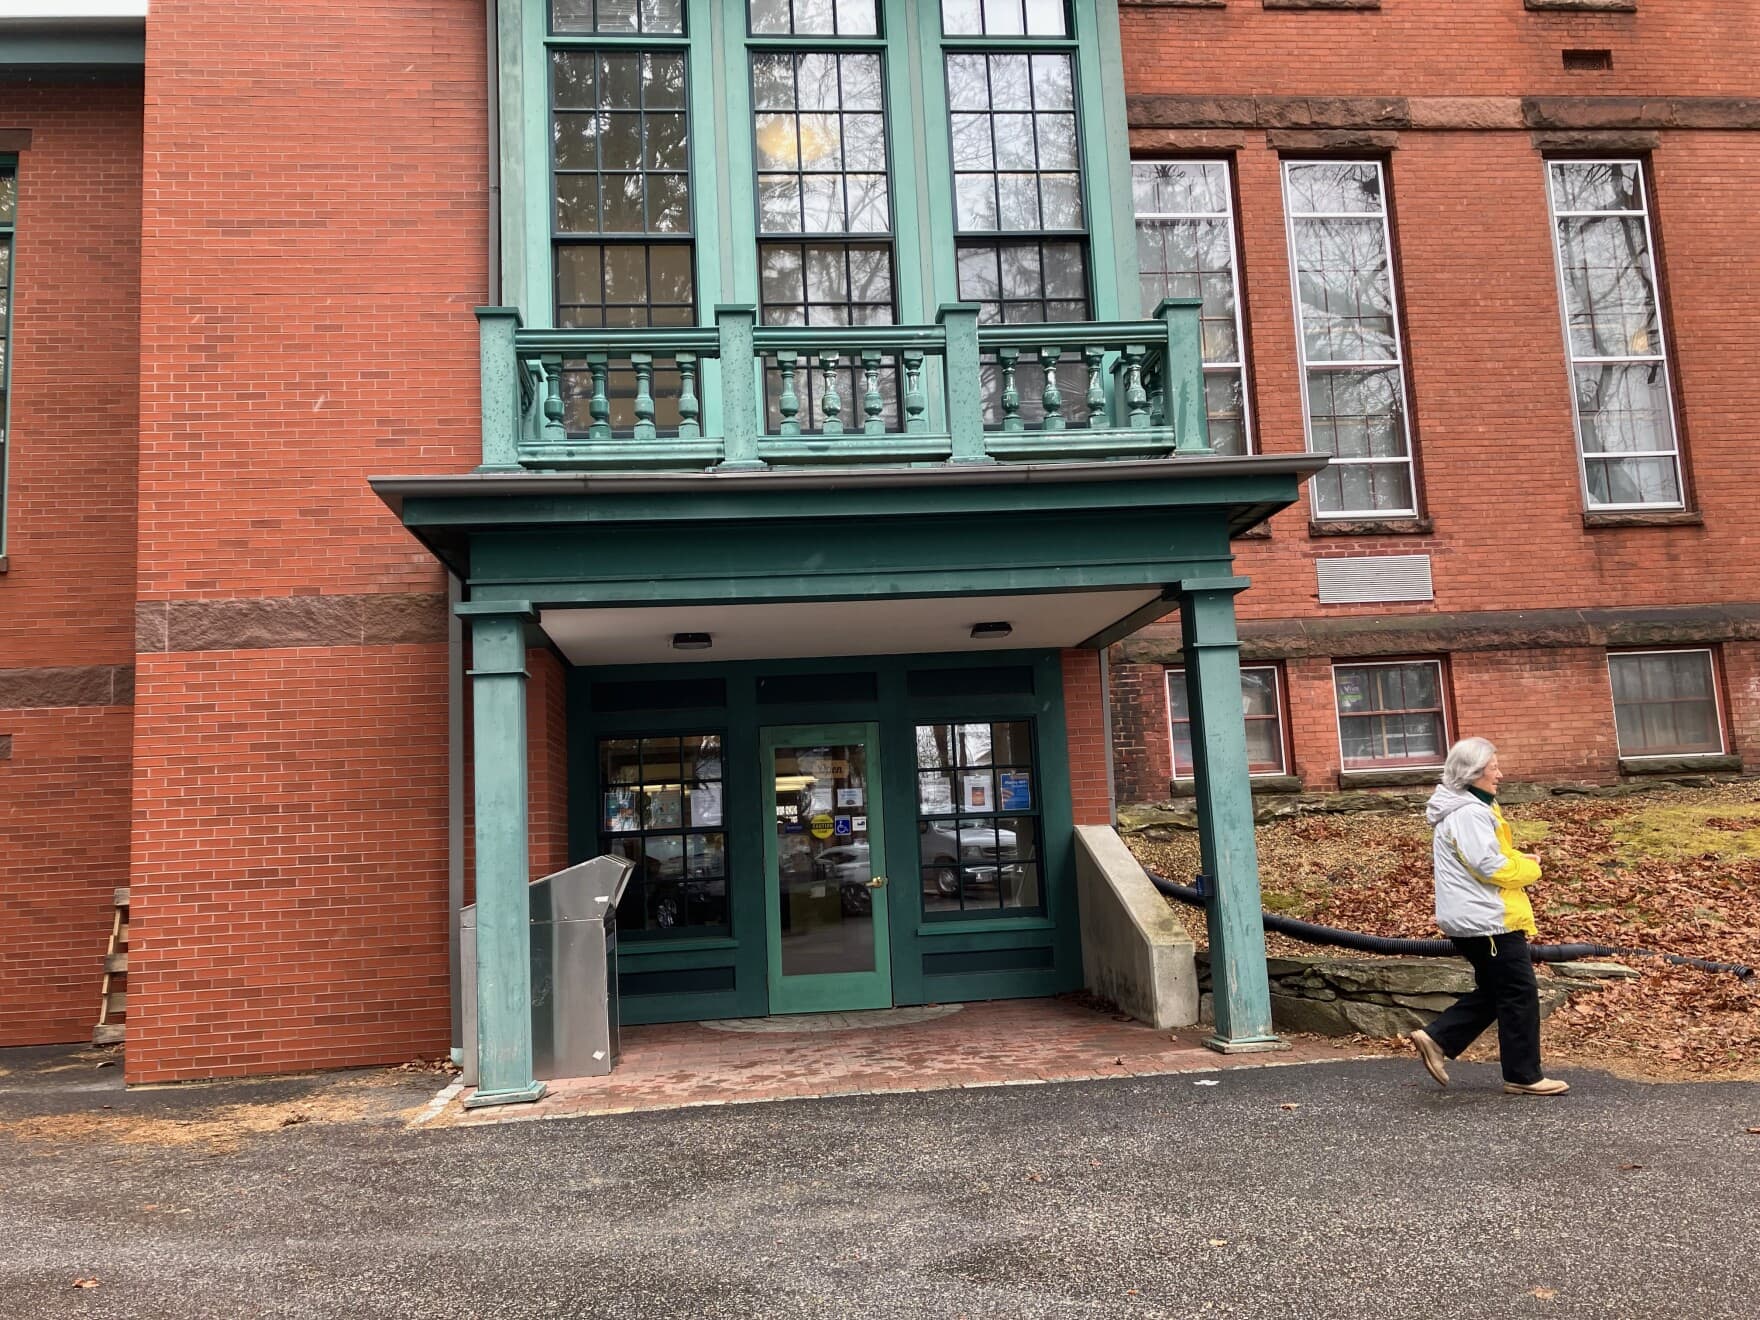 The Barre Museum Association is located in the same building as the public library in Barre, Massachusetts. (Nancy Eve Cohen/NEPM)